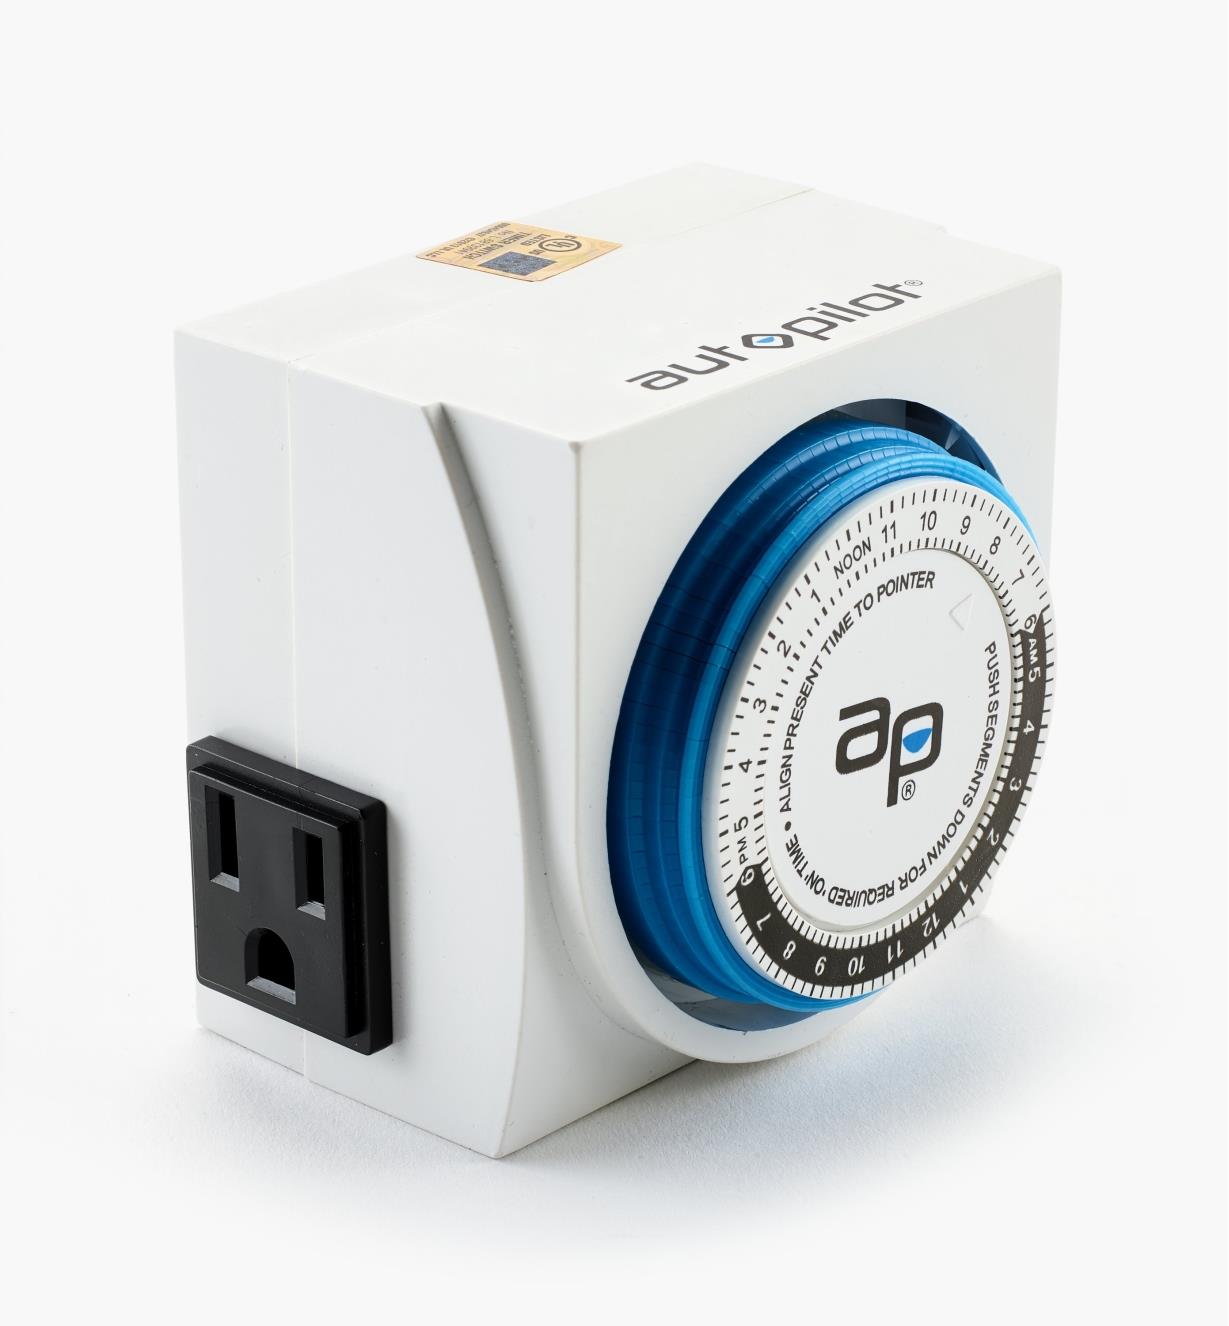 PK415 - Double-Outlet Timer